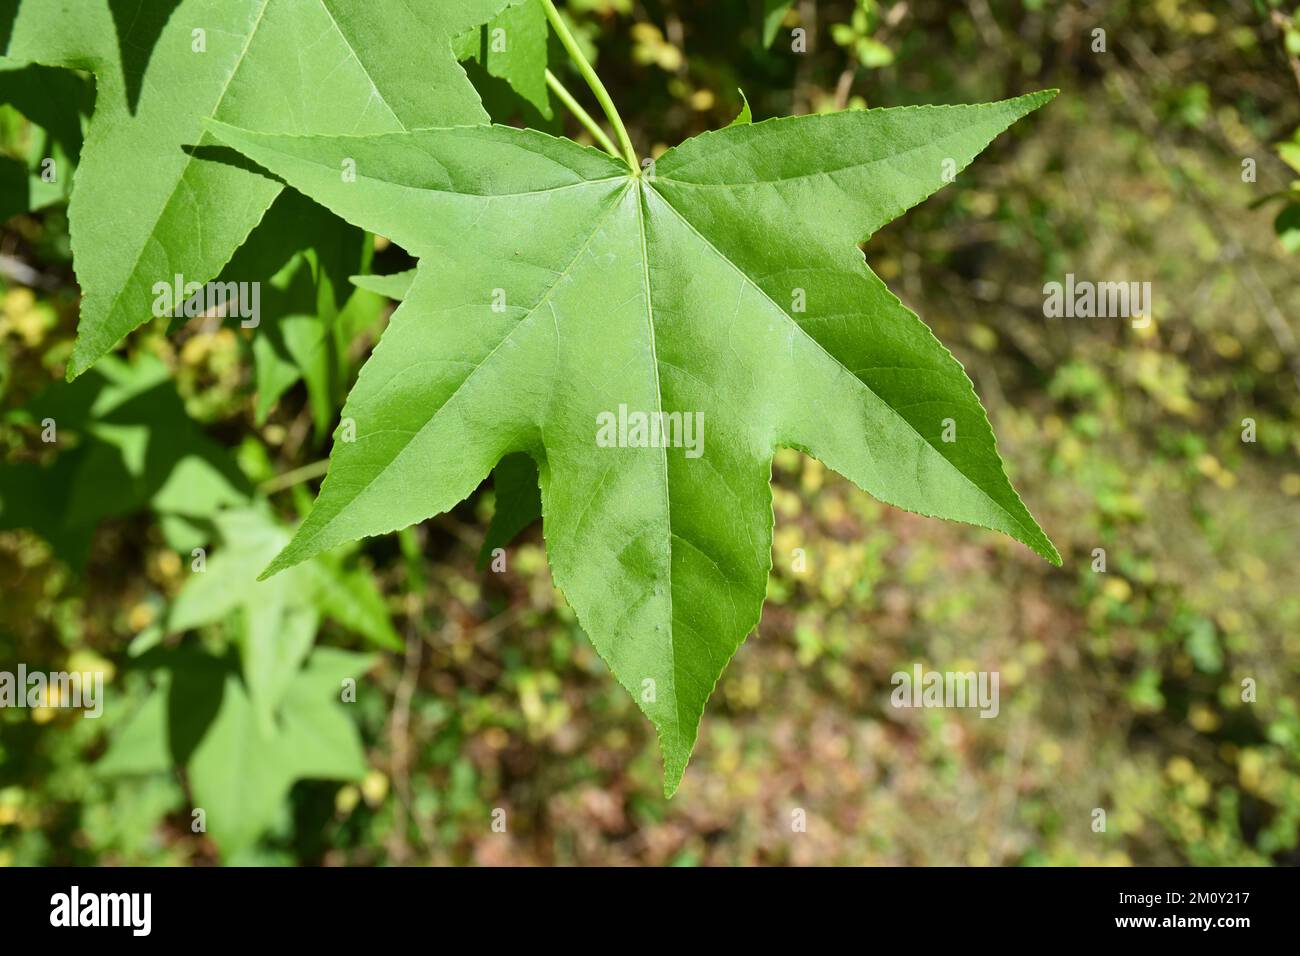 Bright green Maple Leaves close up. Stock Photo